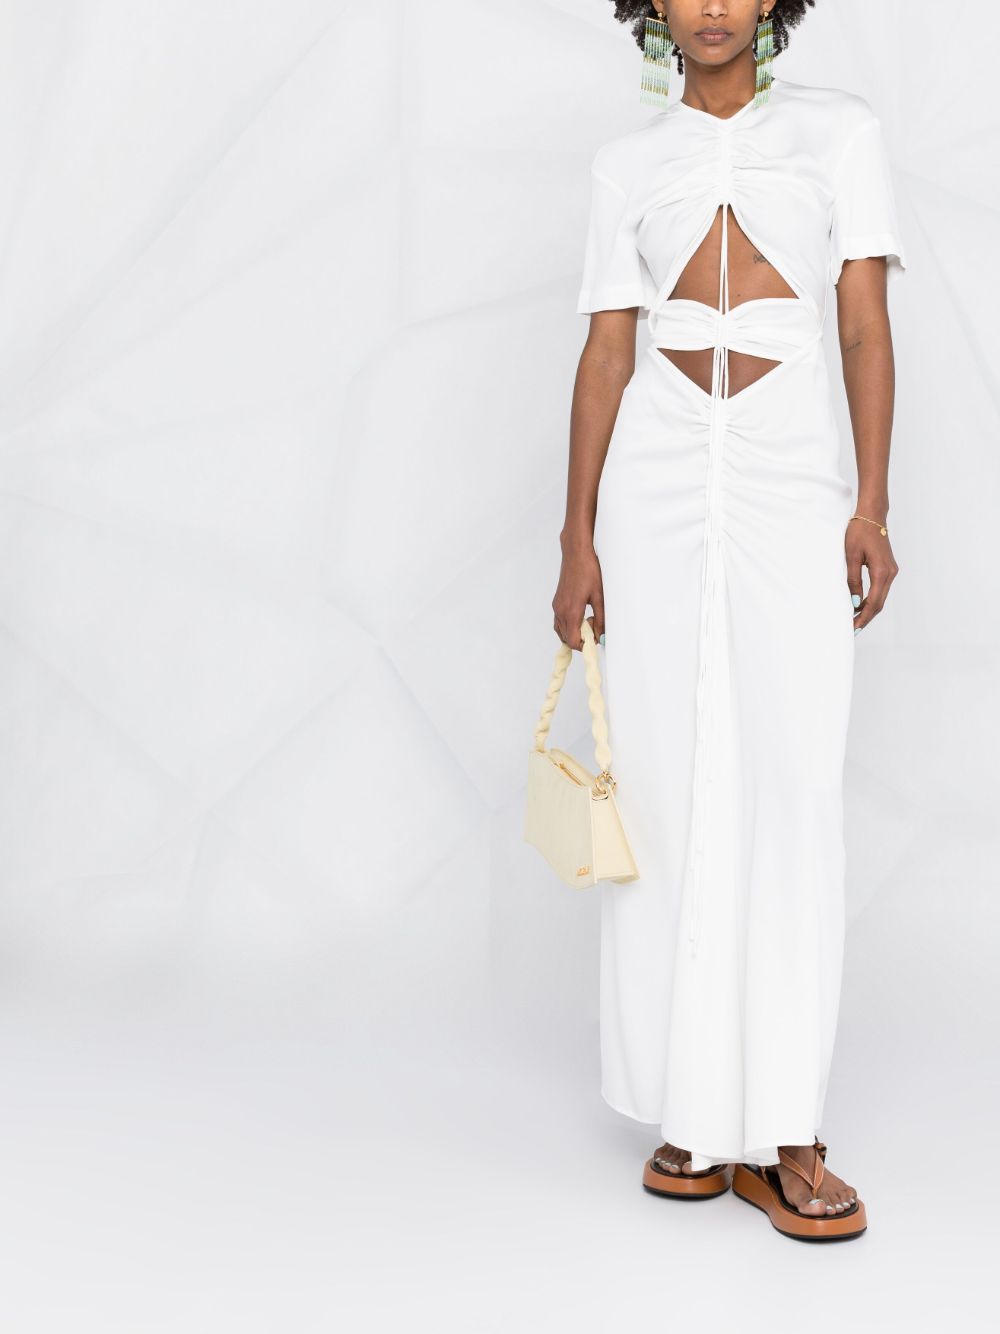 View The Look | Farfetch (US)